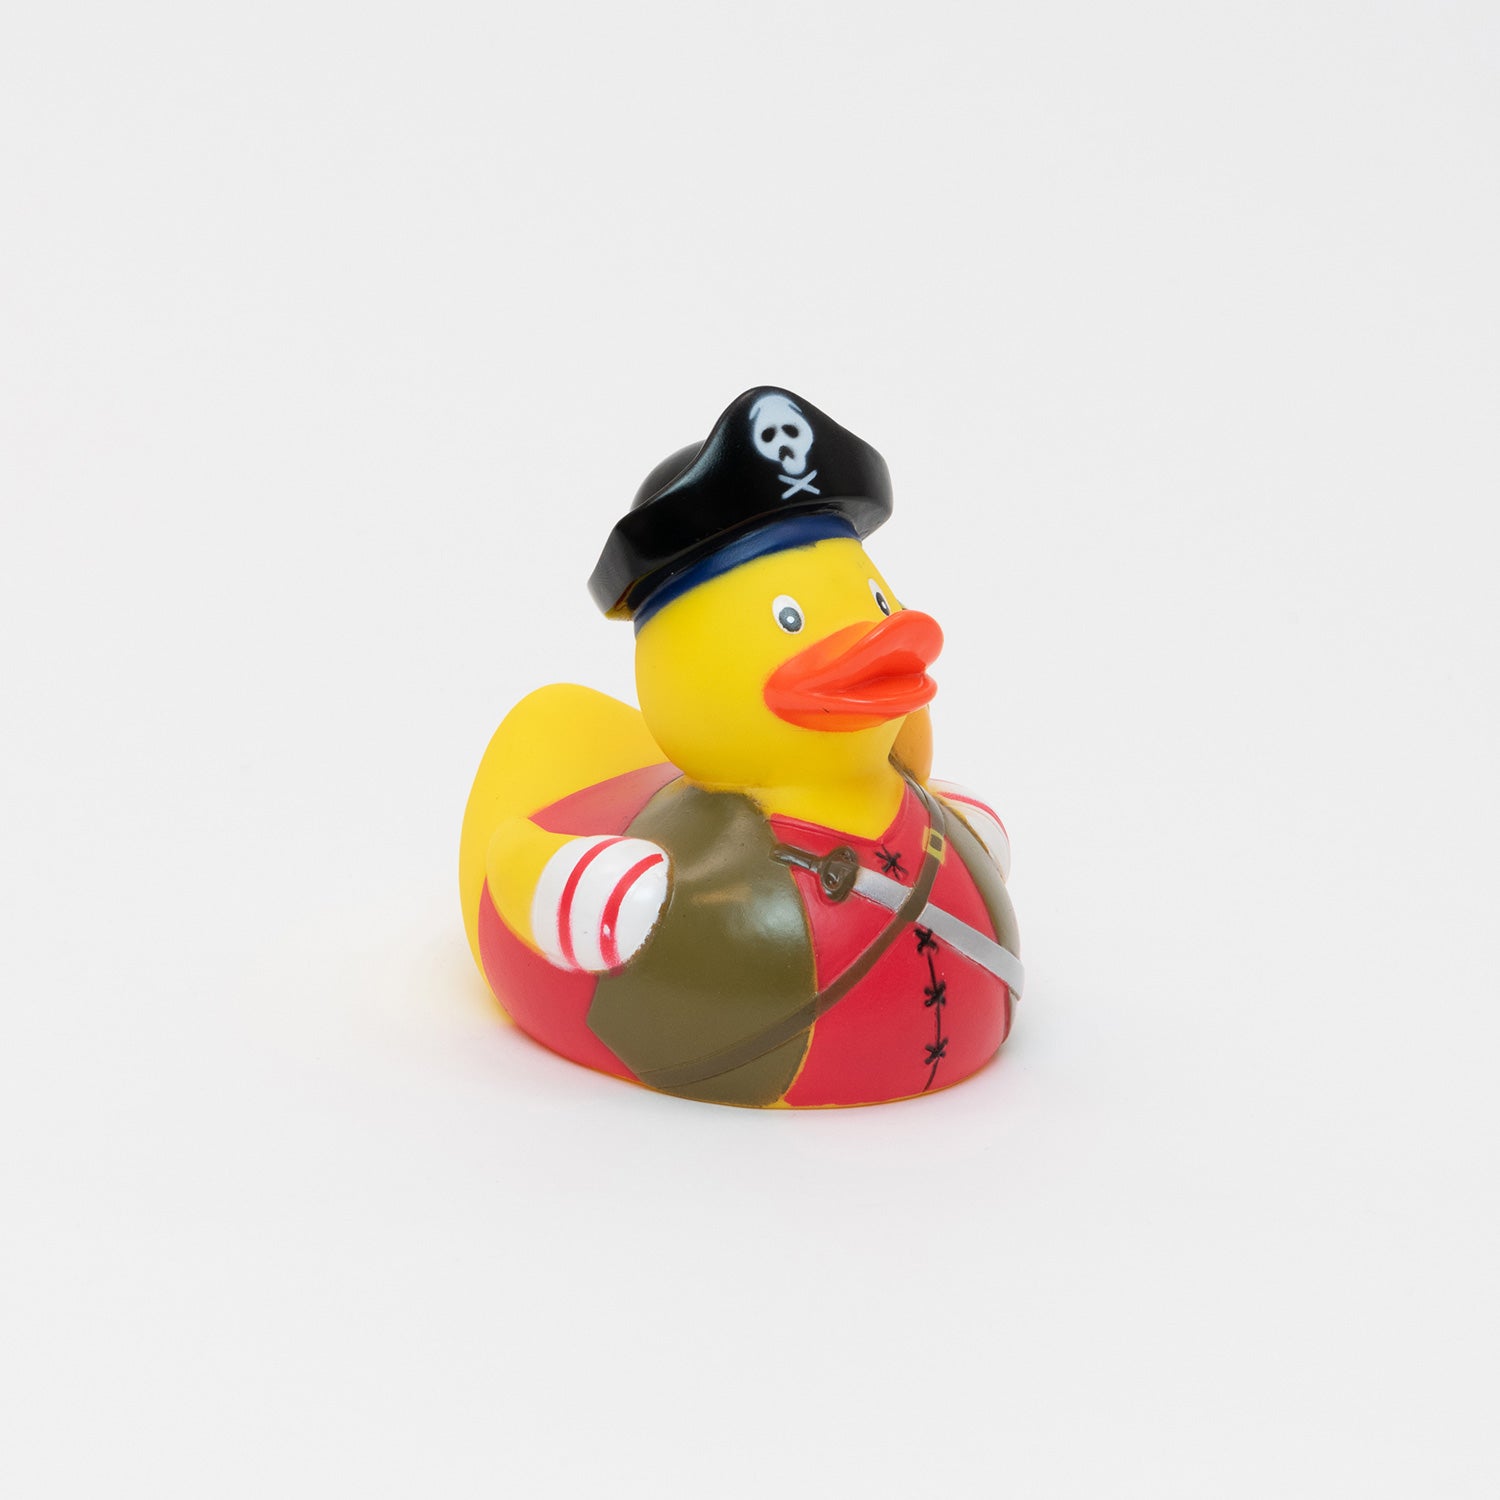 A pirate rubber duck pictured on a white background.